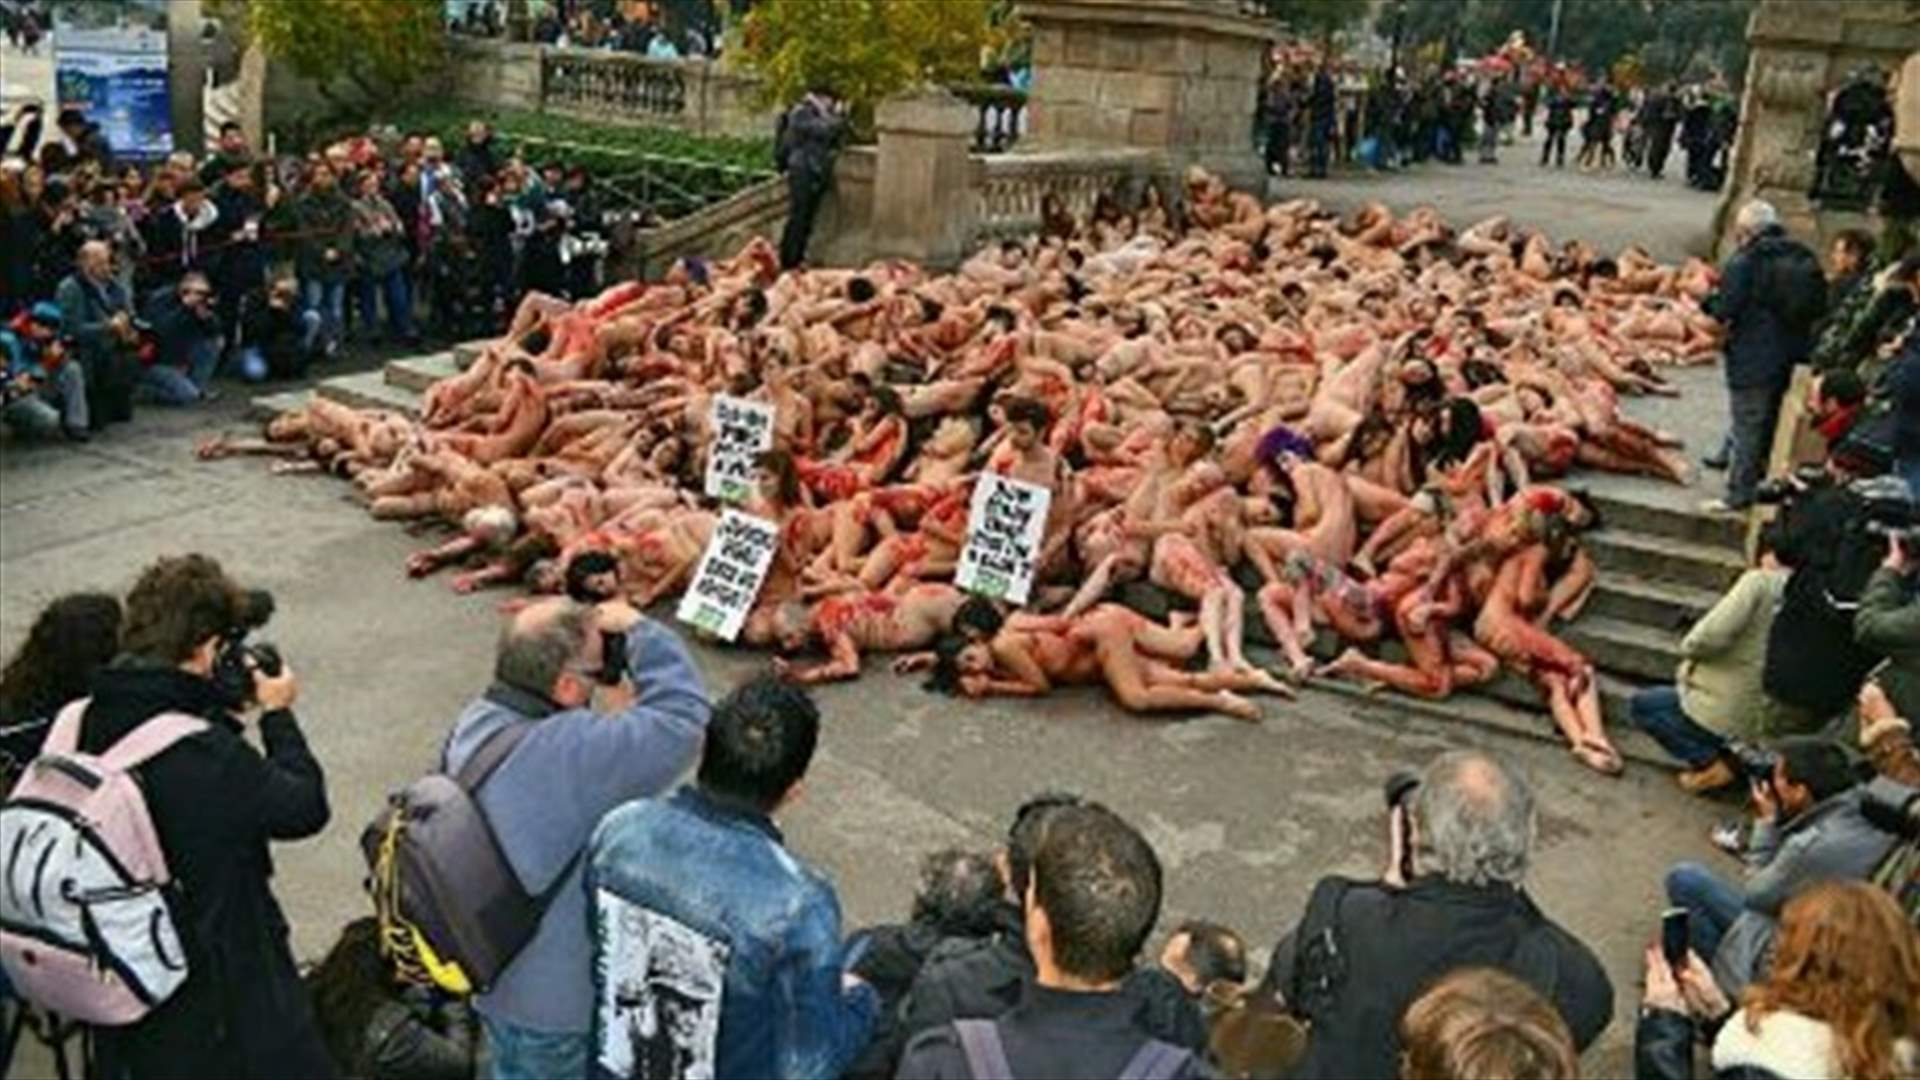 Demonstrators strip naked in Barcelona to protest at fur, leather use